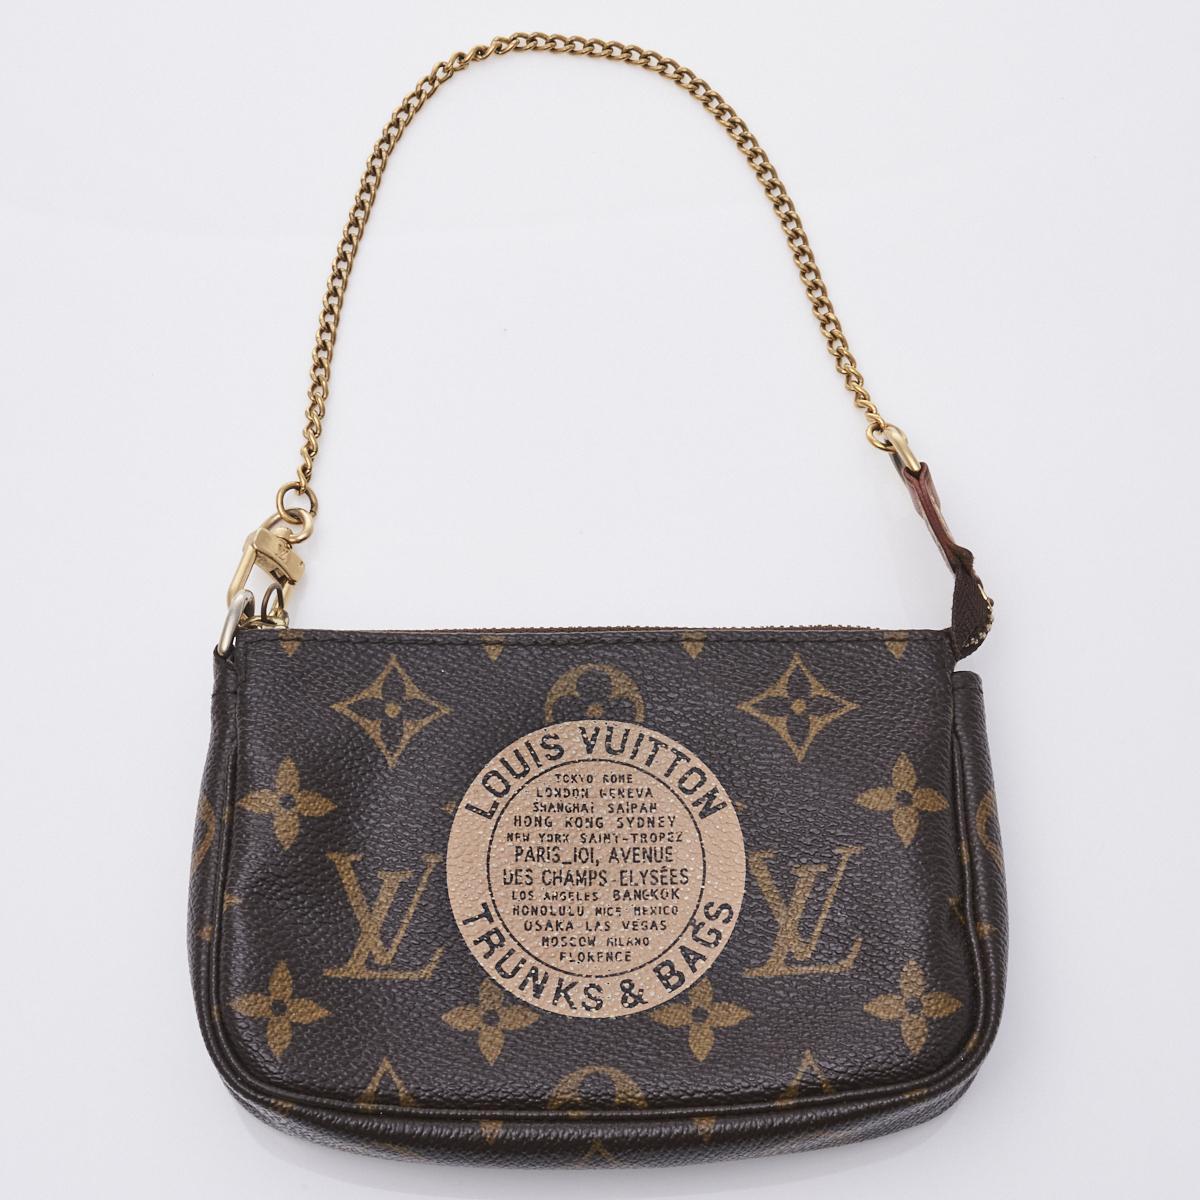 Sold at Auction: Louis Vuitton Monogram Canvas Small Trunk